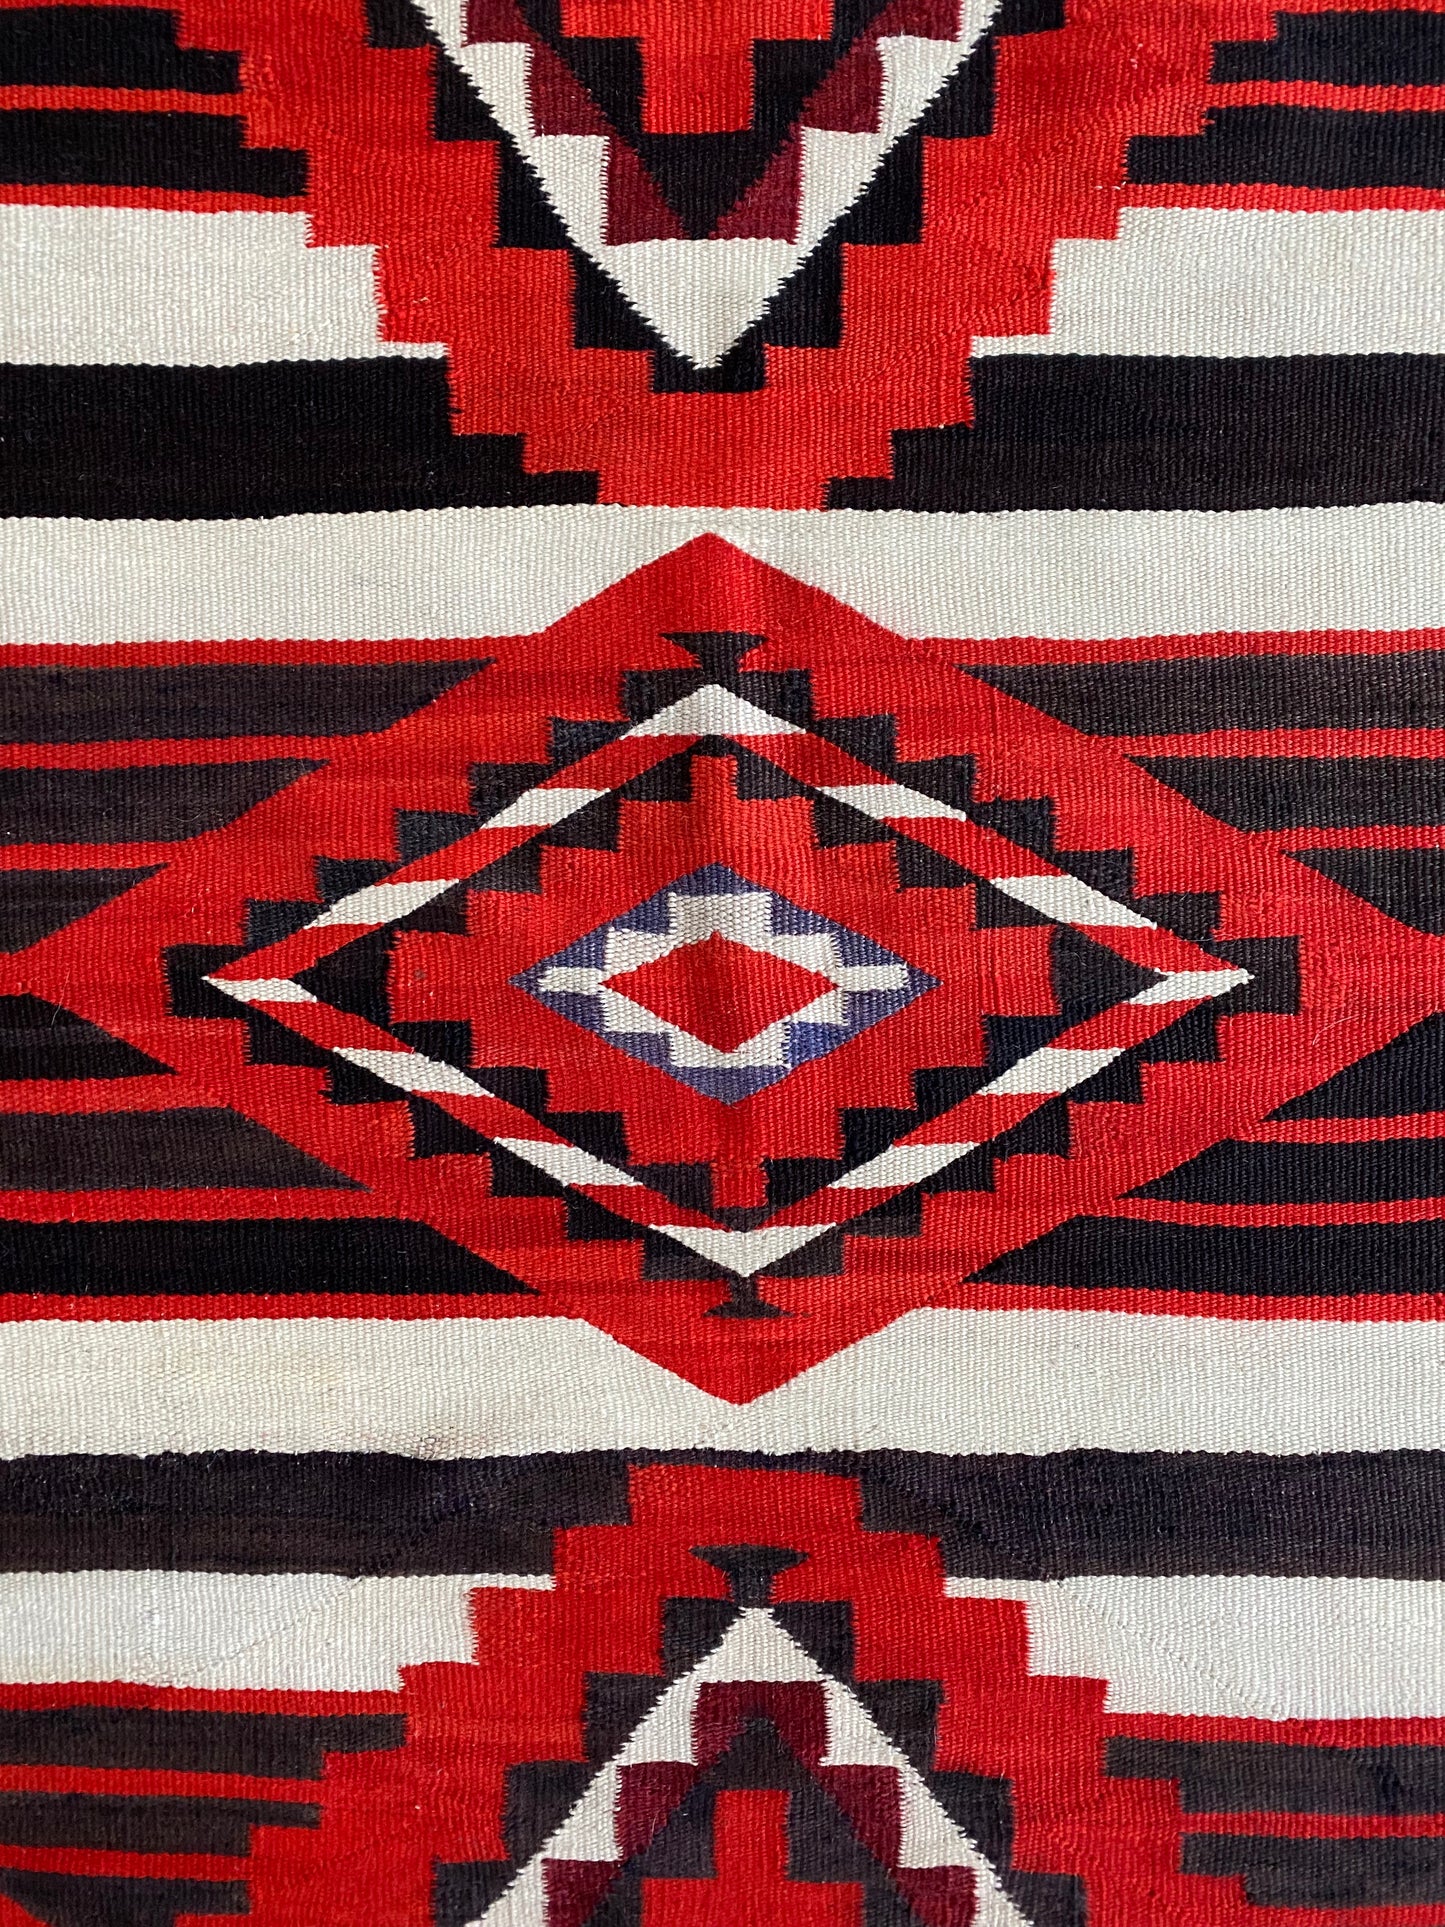 Antique 3rd Phase Chief's Blanket - 55" x 77"